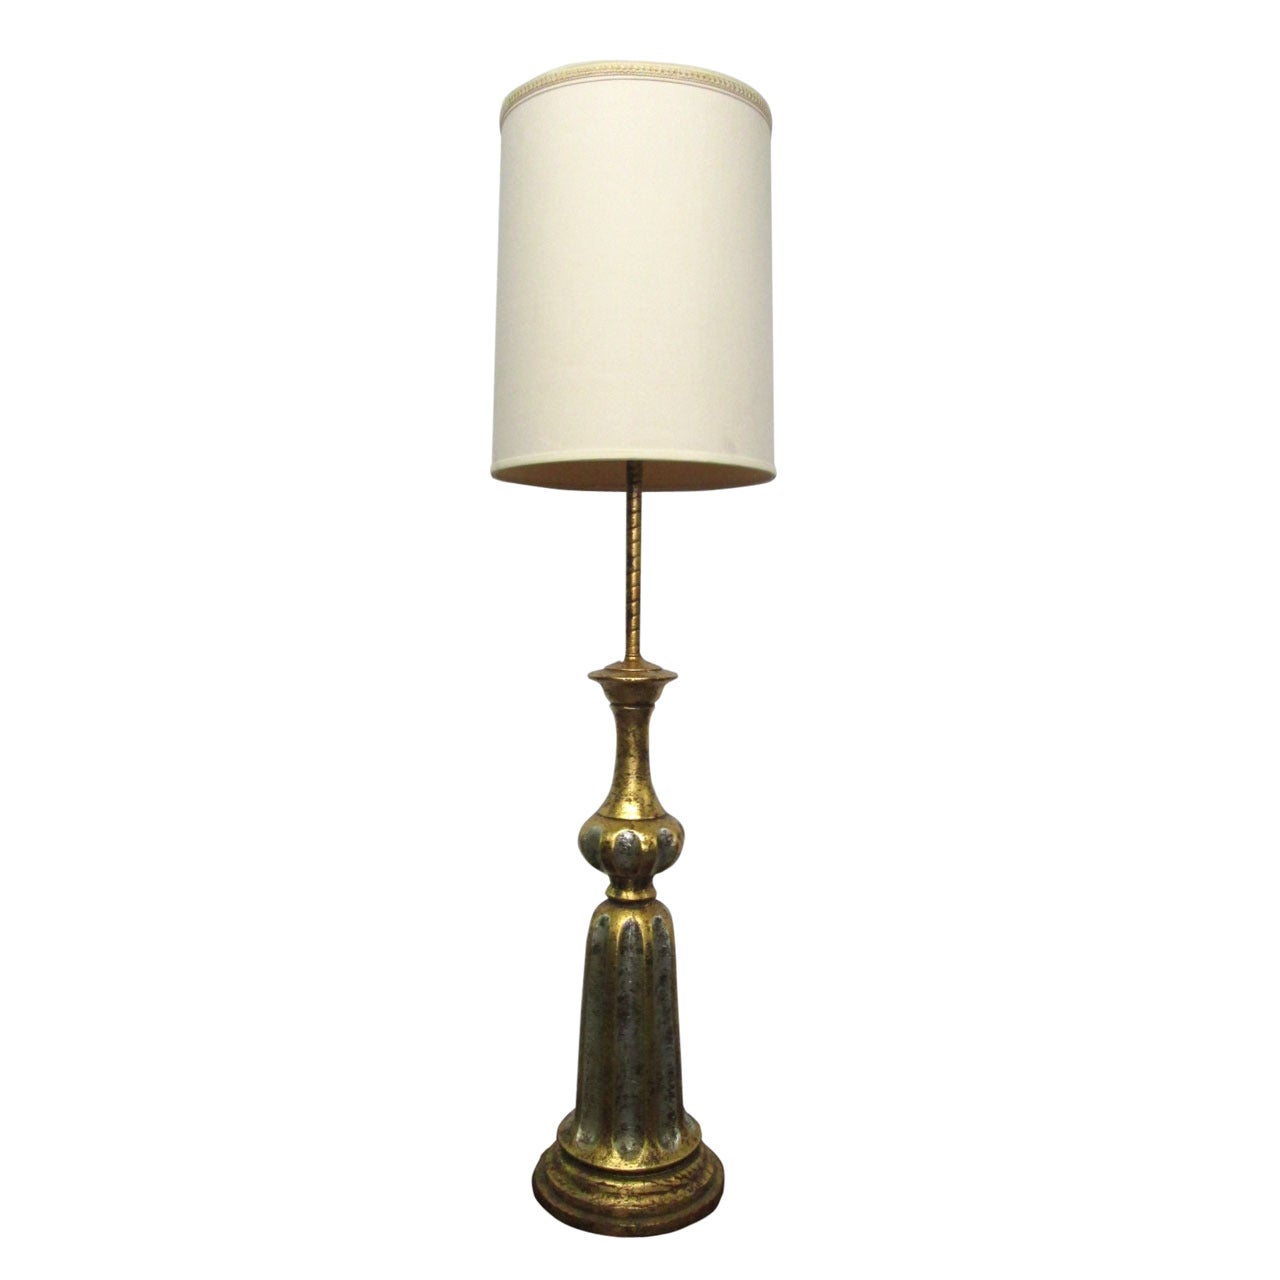 James Mont Style Tall Silver Gilded Lamp